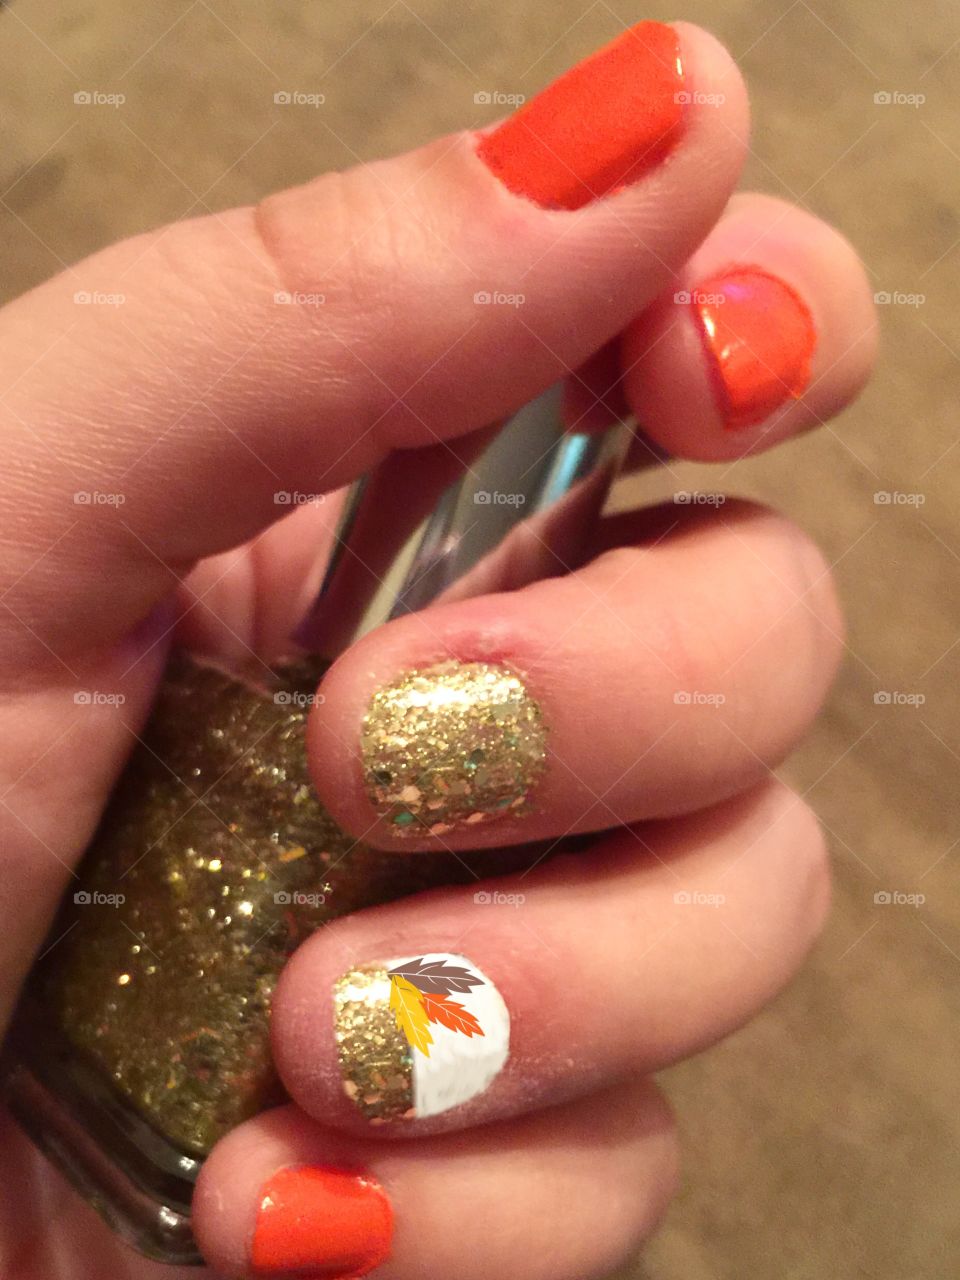 It's getting closer to fall, time for fall nails!